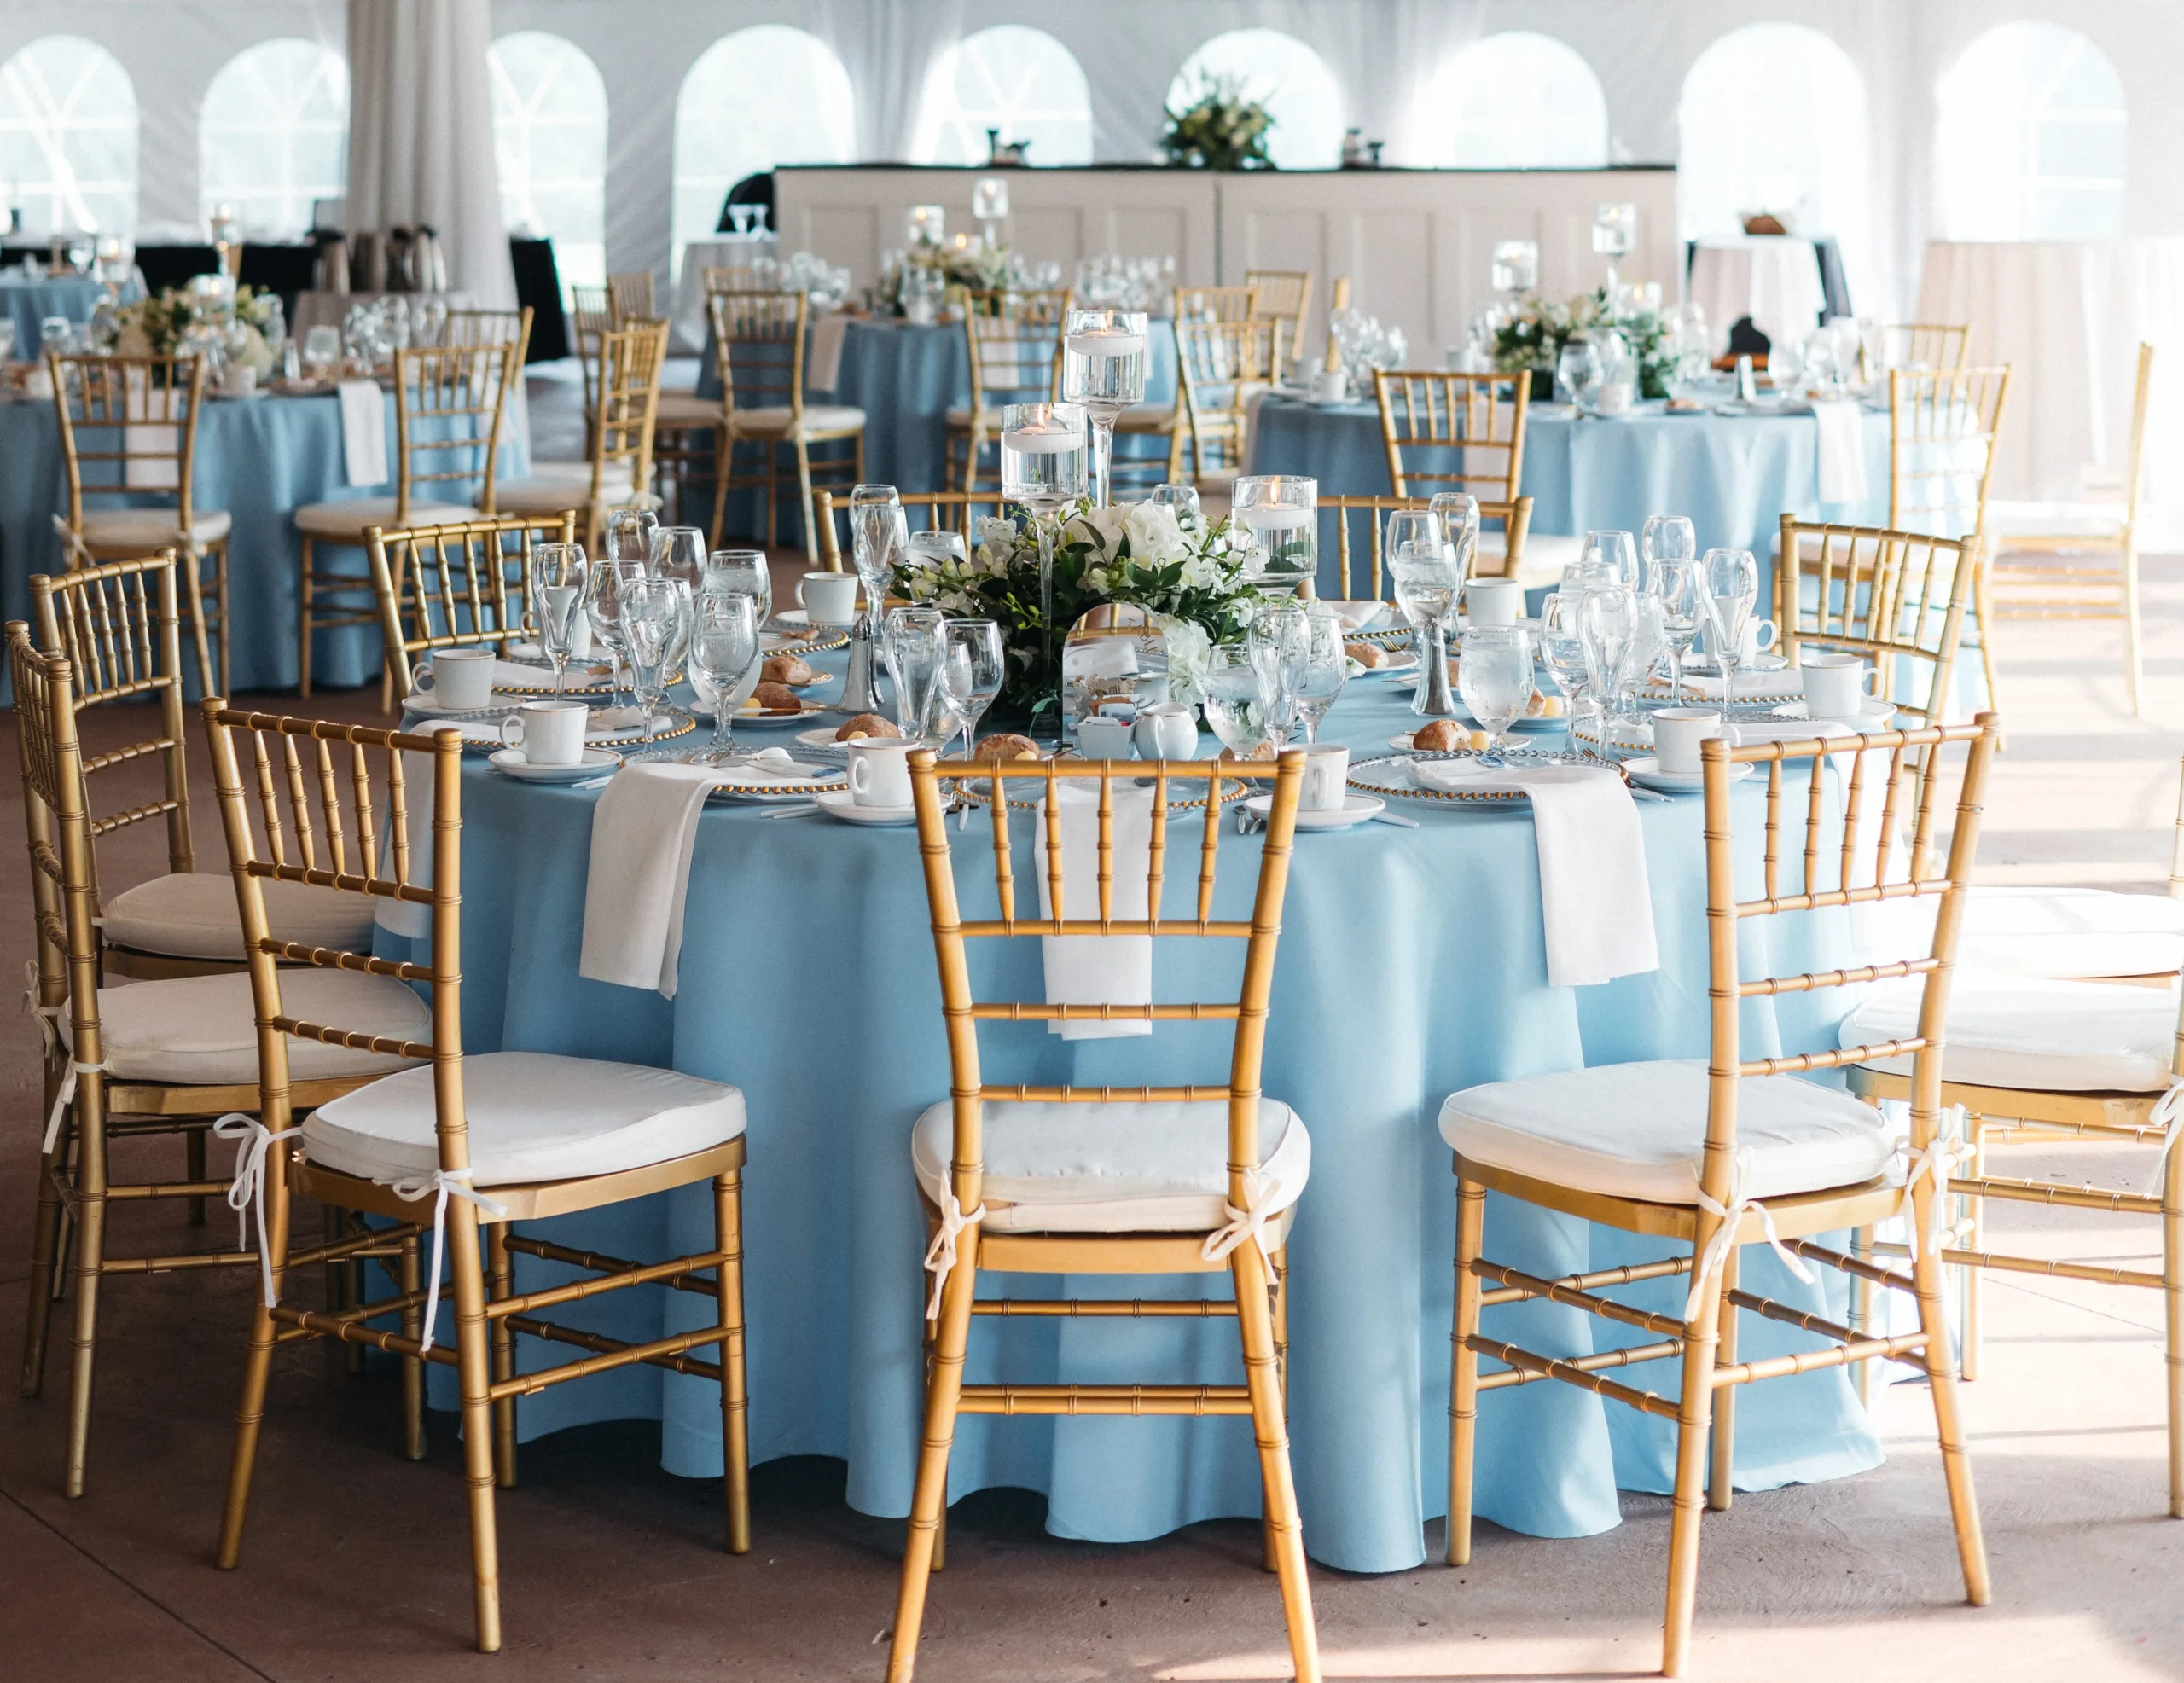 reception setup with light blue and white decorations